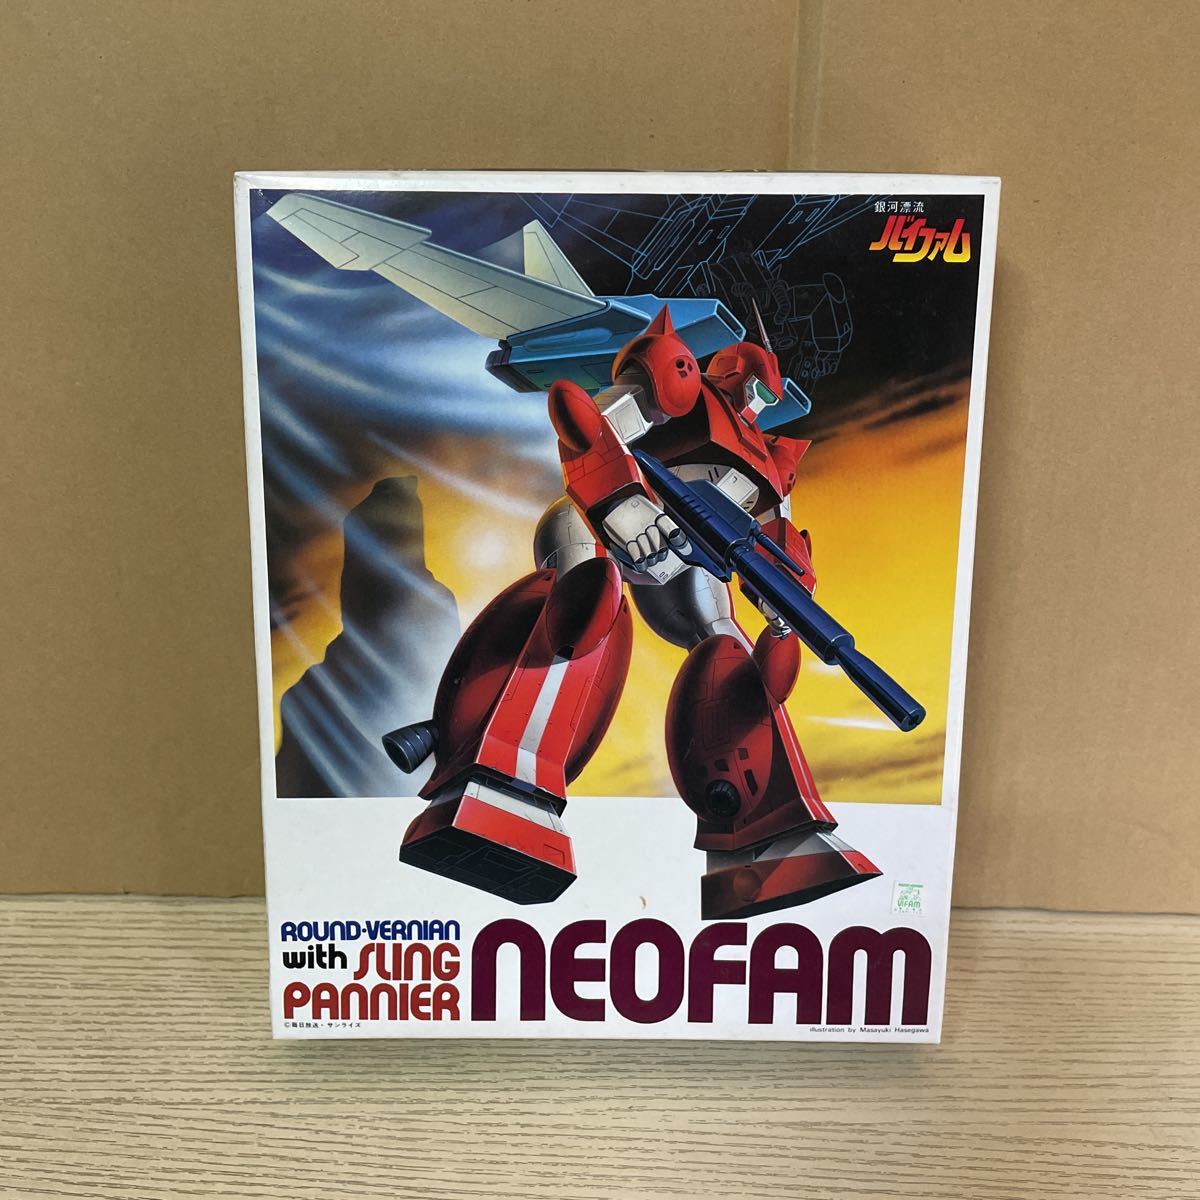 5 Bandai Ginga Hyouryuu Vifam 1/144ne off .m not yet constructed including in a package un- possible outside fixed form shipping 